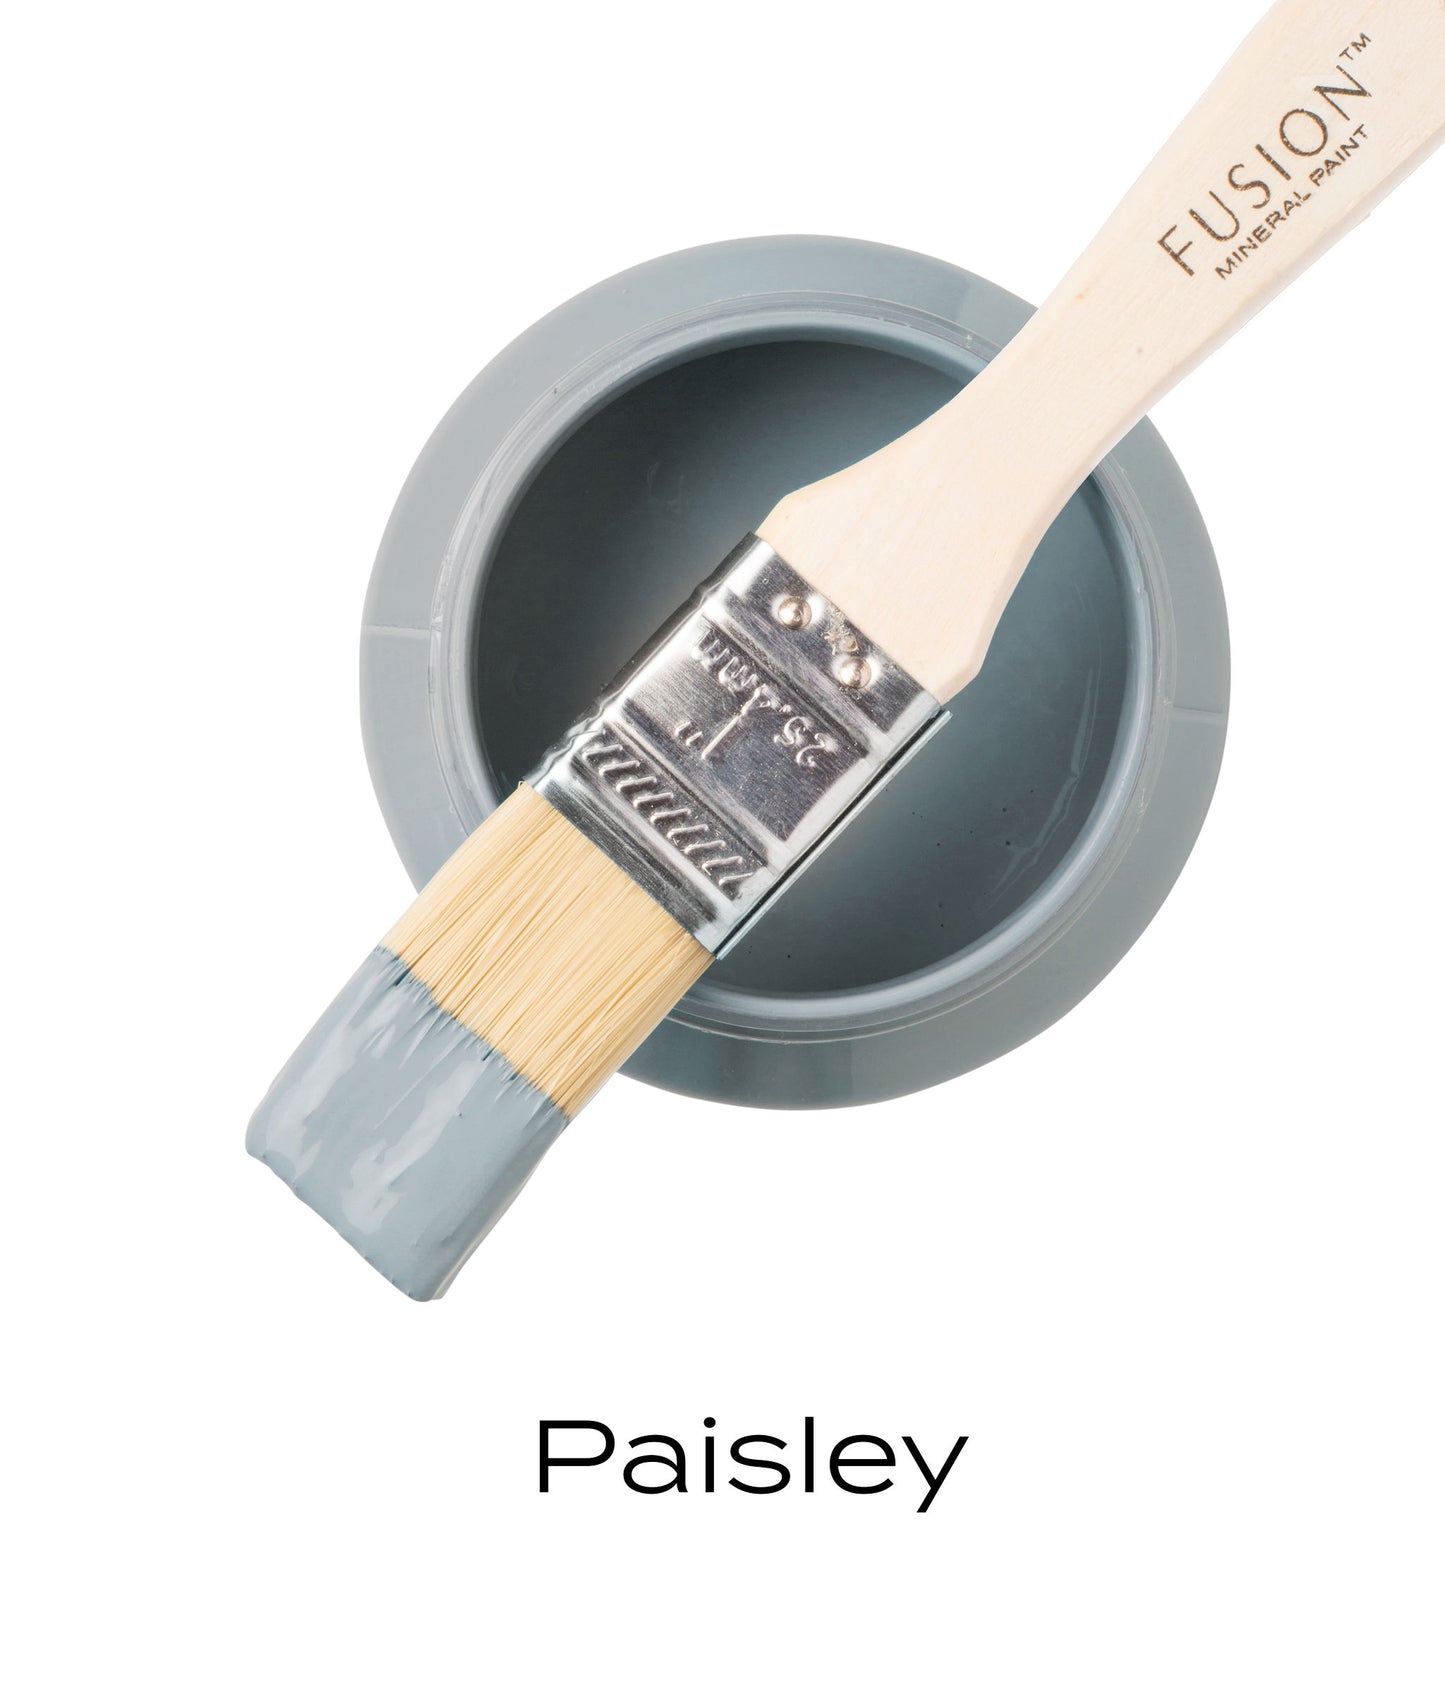 Fusion Mineral Paint Paisley